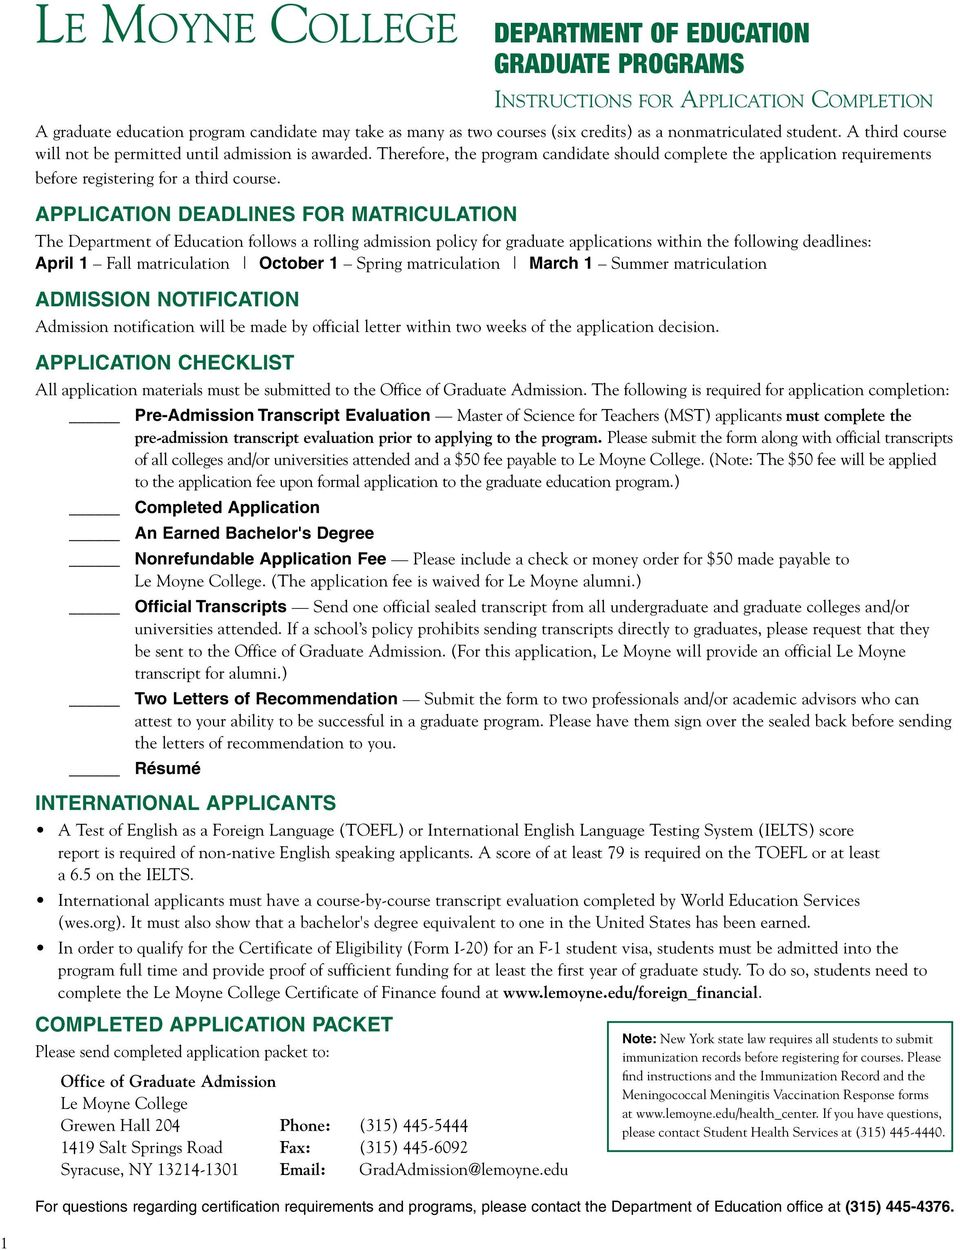 APPLICATION DEADLINES FOR MATRICULATION The Department of Education follows a rolling admission policy for graduate applications within the following deadlines: April 1 Fall matriculation October 1